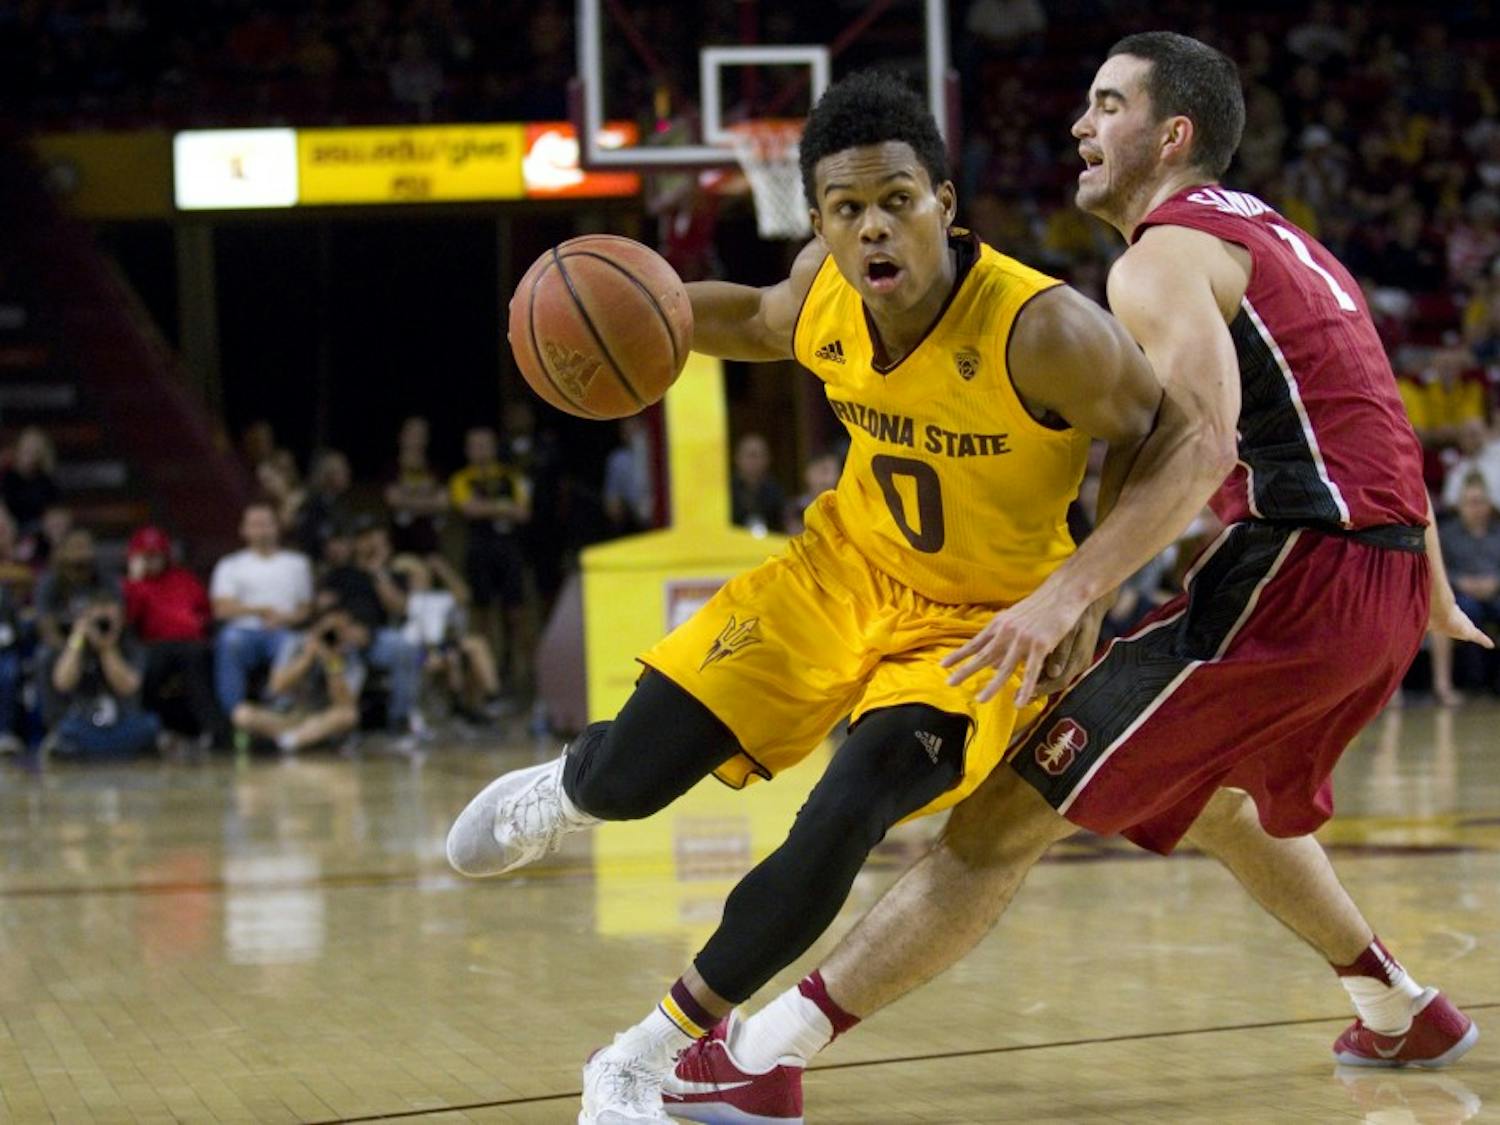 ASU junior guard Tra Holder (0) tries to drive by Cardinal guard Christian Sanders during a men's basketball game versus the University of Stanford Cardinal in Wells Fargo Arena in Tempe, Arizona on Saturday, Feb. 11, 2017. ASU won 75-69. (Josh Orcutt/State Press)